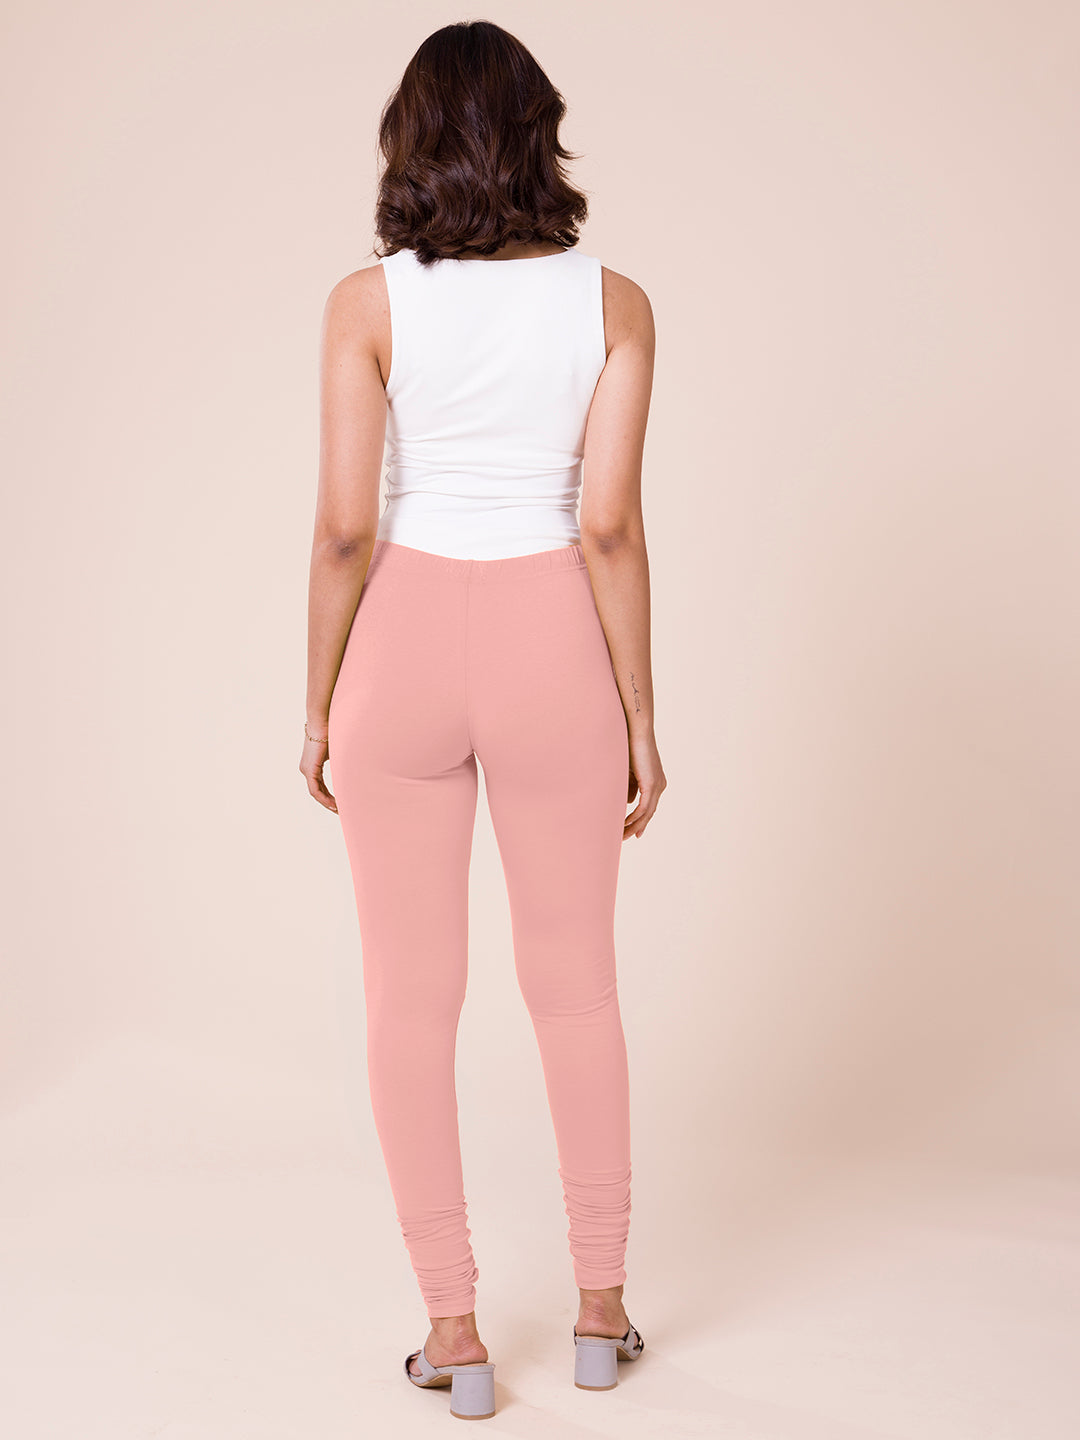 Pink | High Waisted Leggings | Body Contouring – Exoticathletica